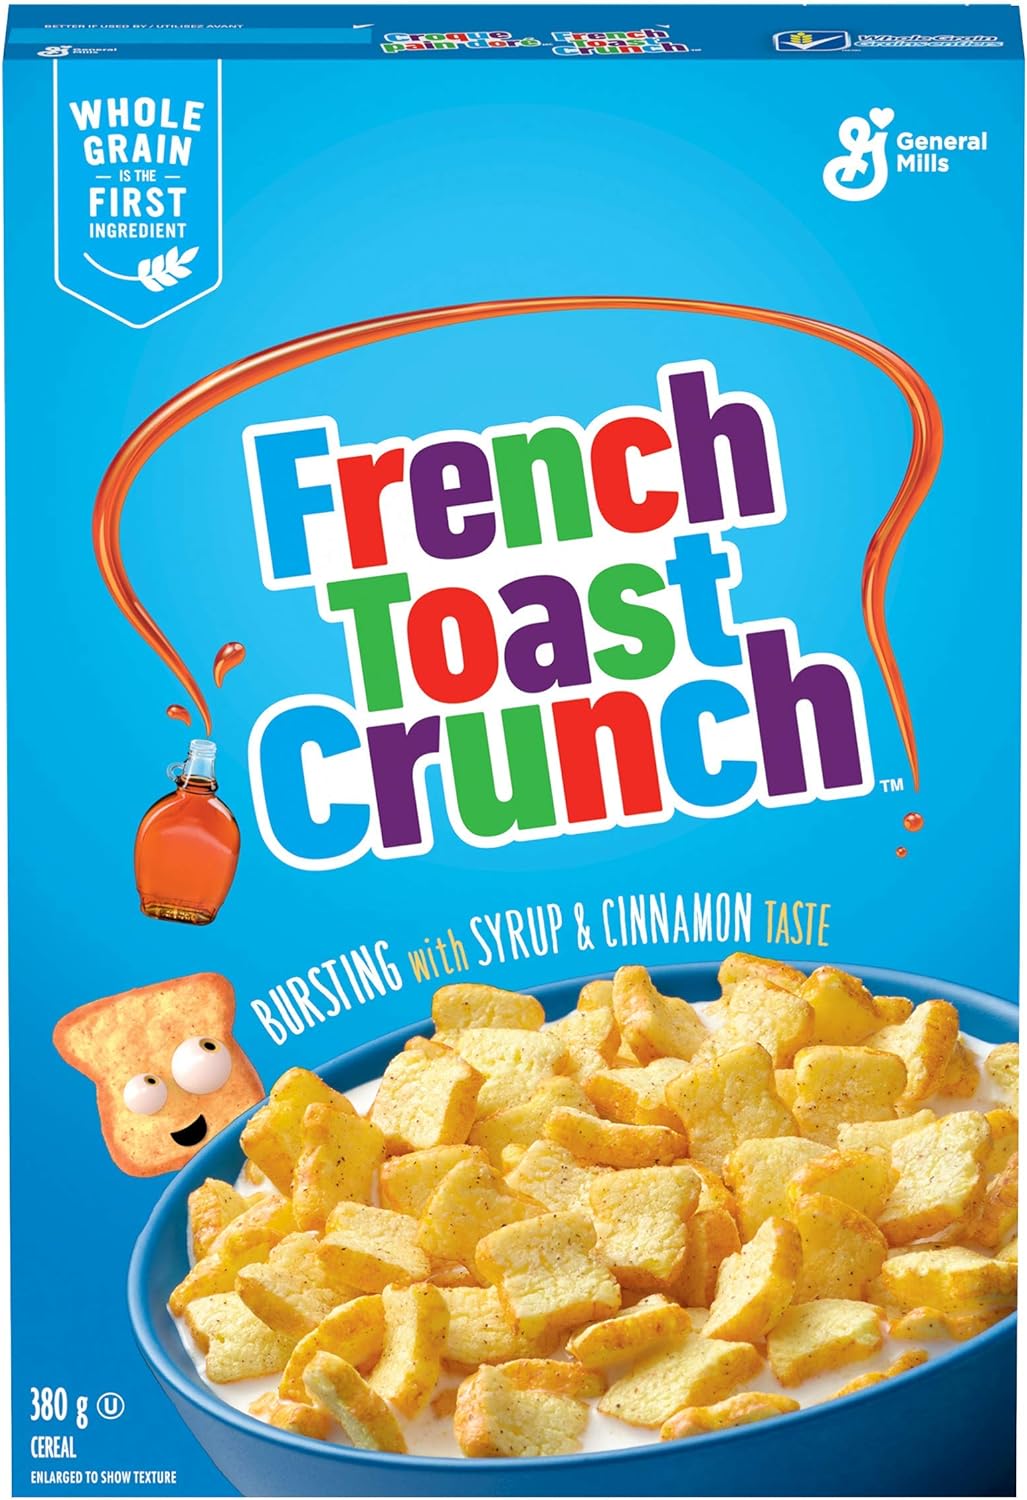 General Mills - French Toast Crunch - Cinnamon + Maple - Breakfast Cereal - 380g